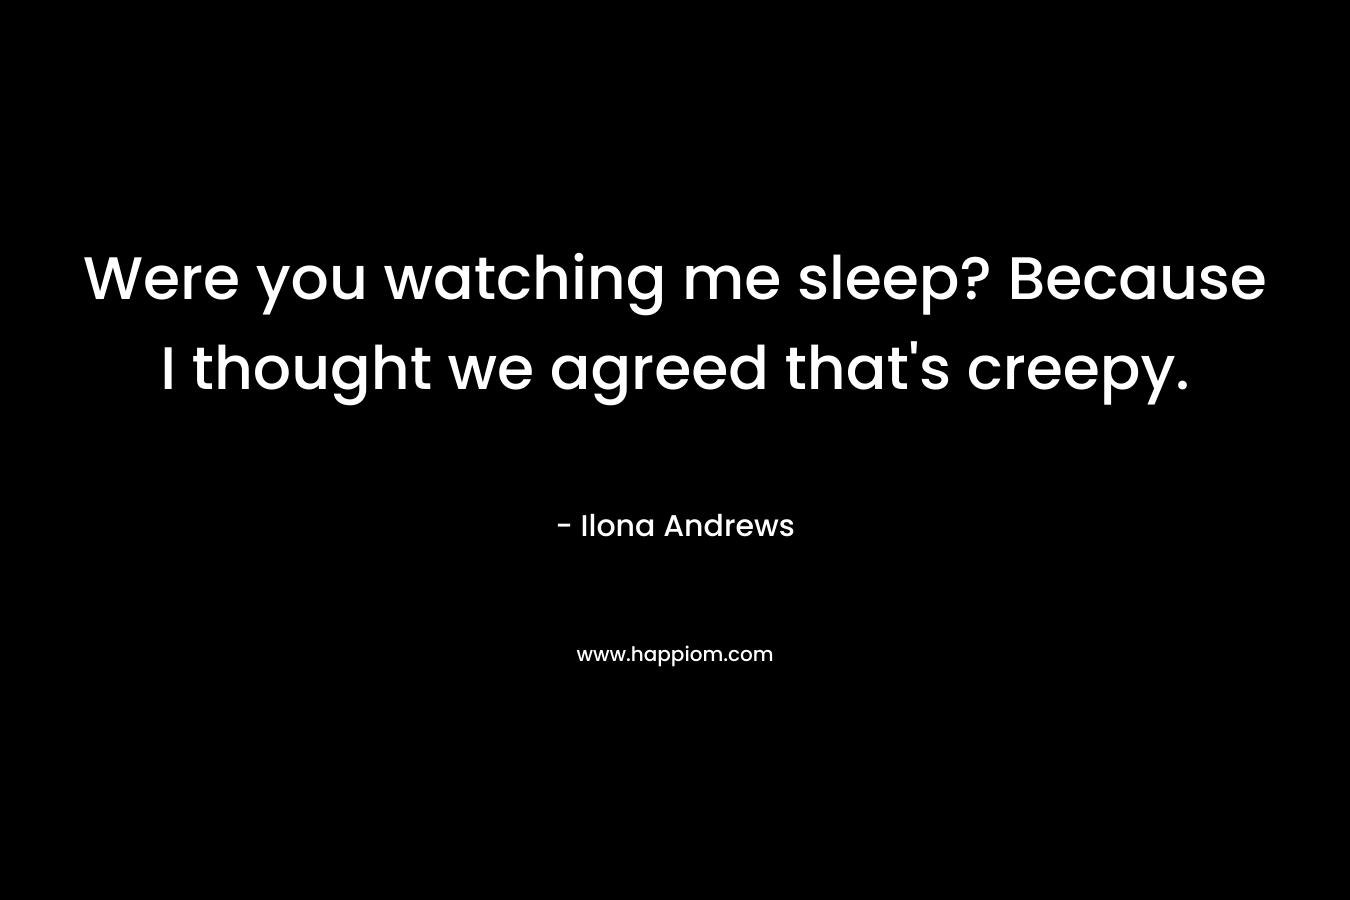 Were you watching me sleep? Because I thought we agreed that’s creepy. – Ilona Andrews